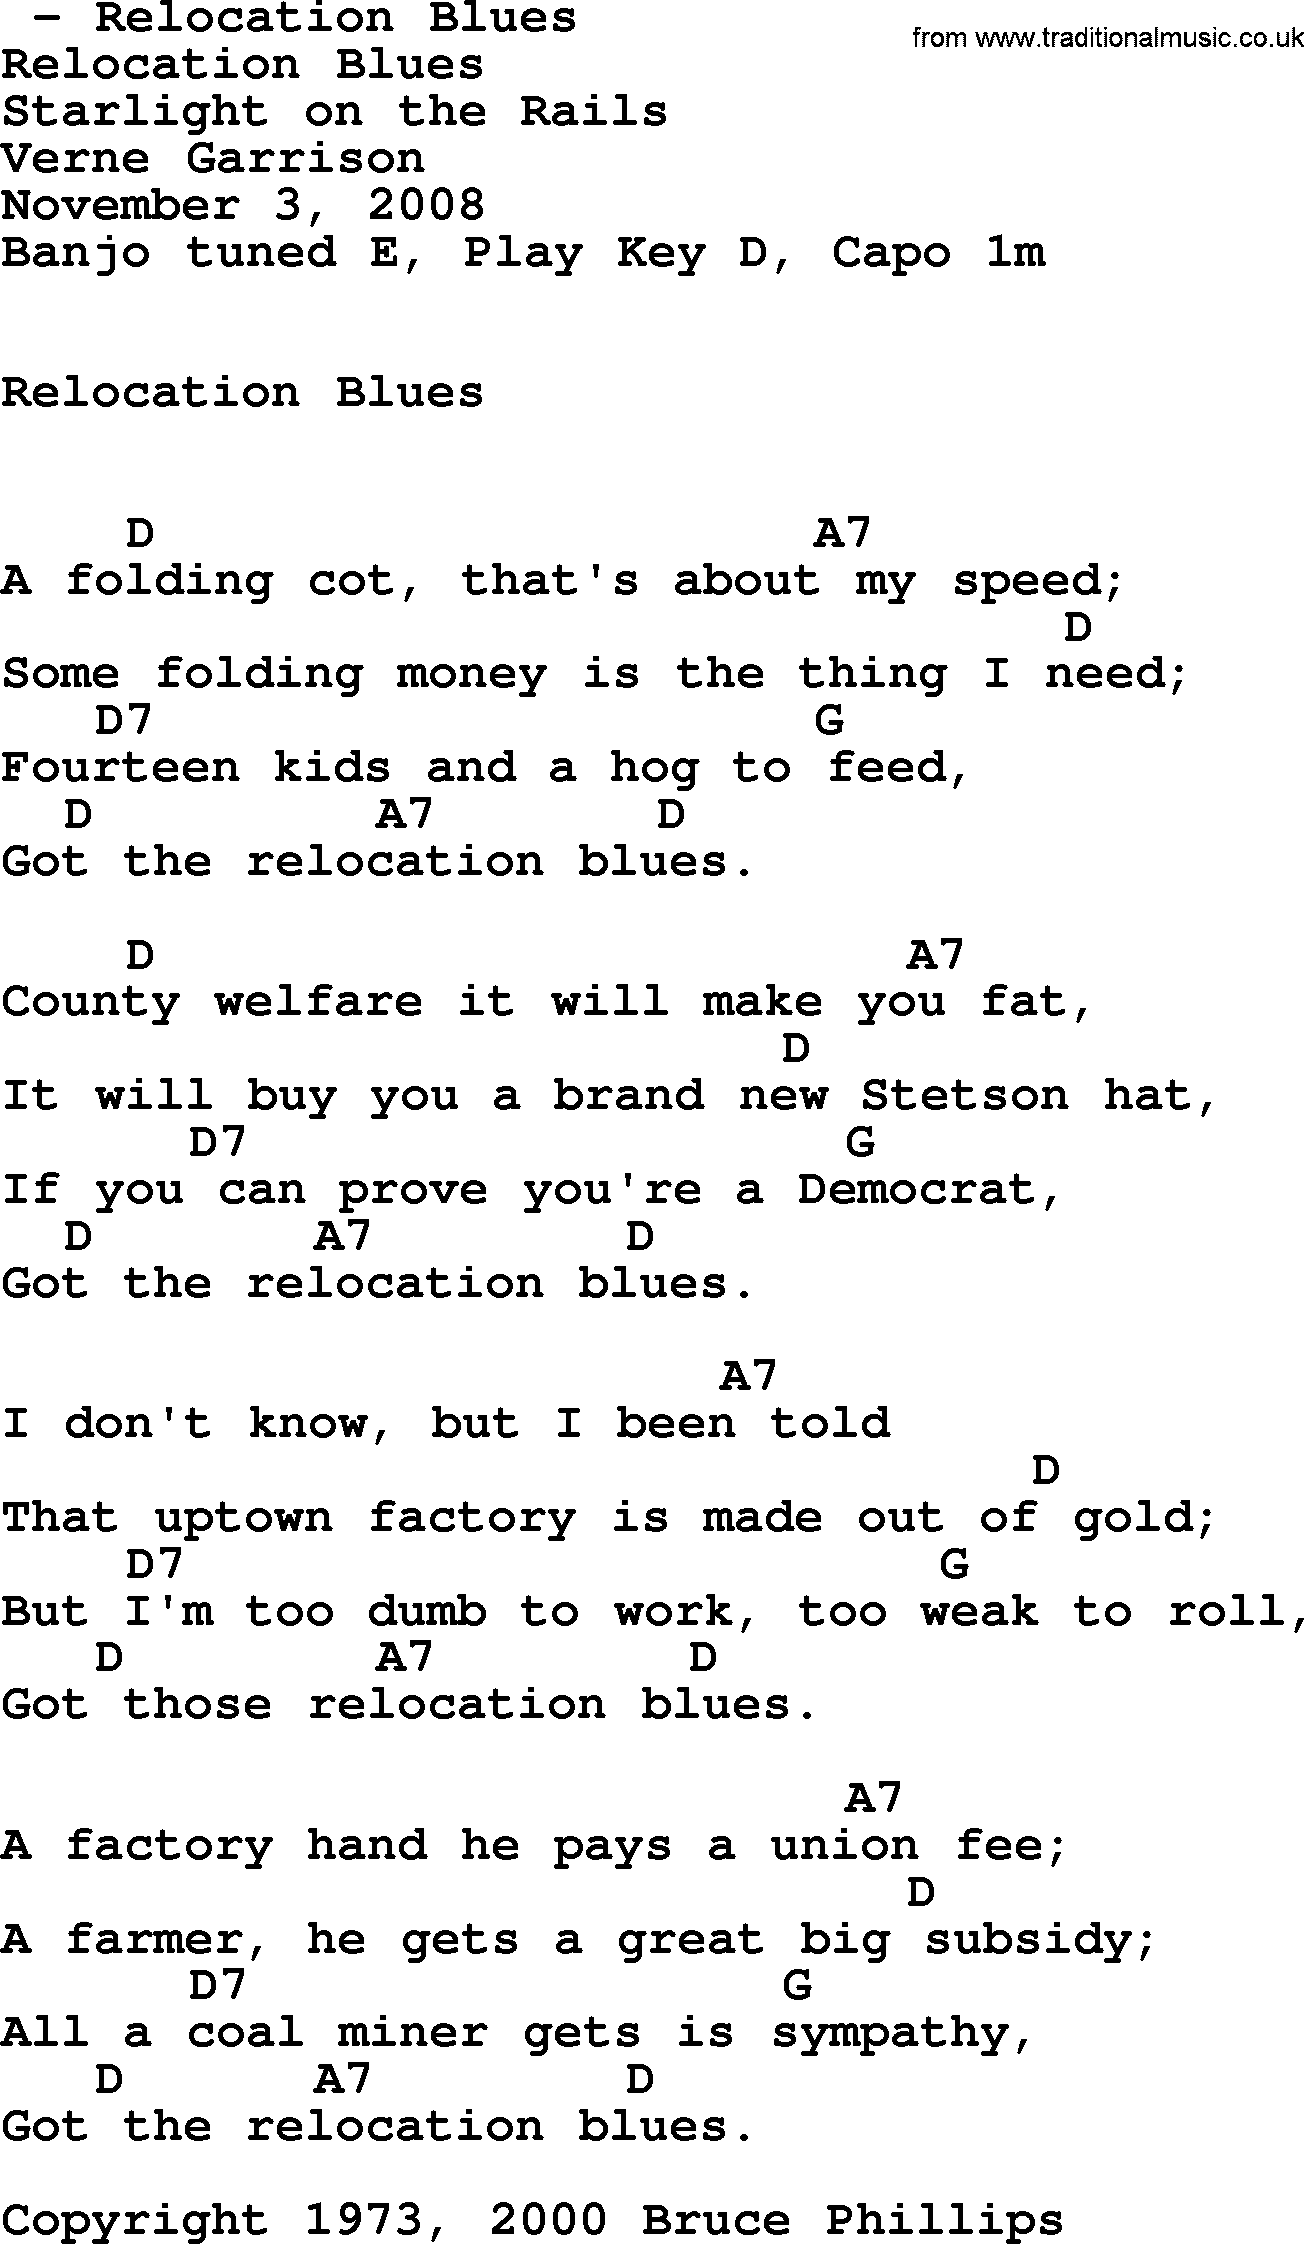 Bluegrass song: Relocation Blues, lyrics and chords